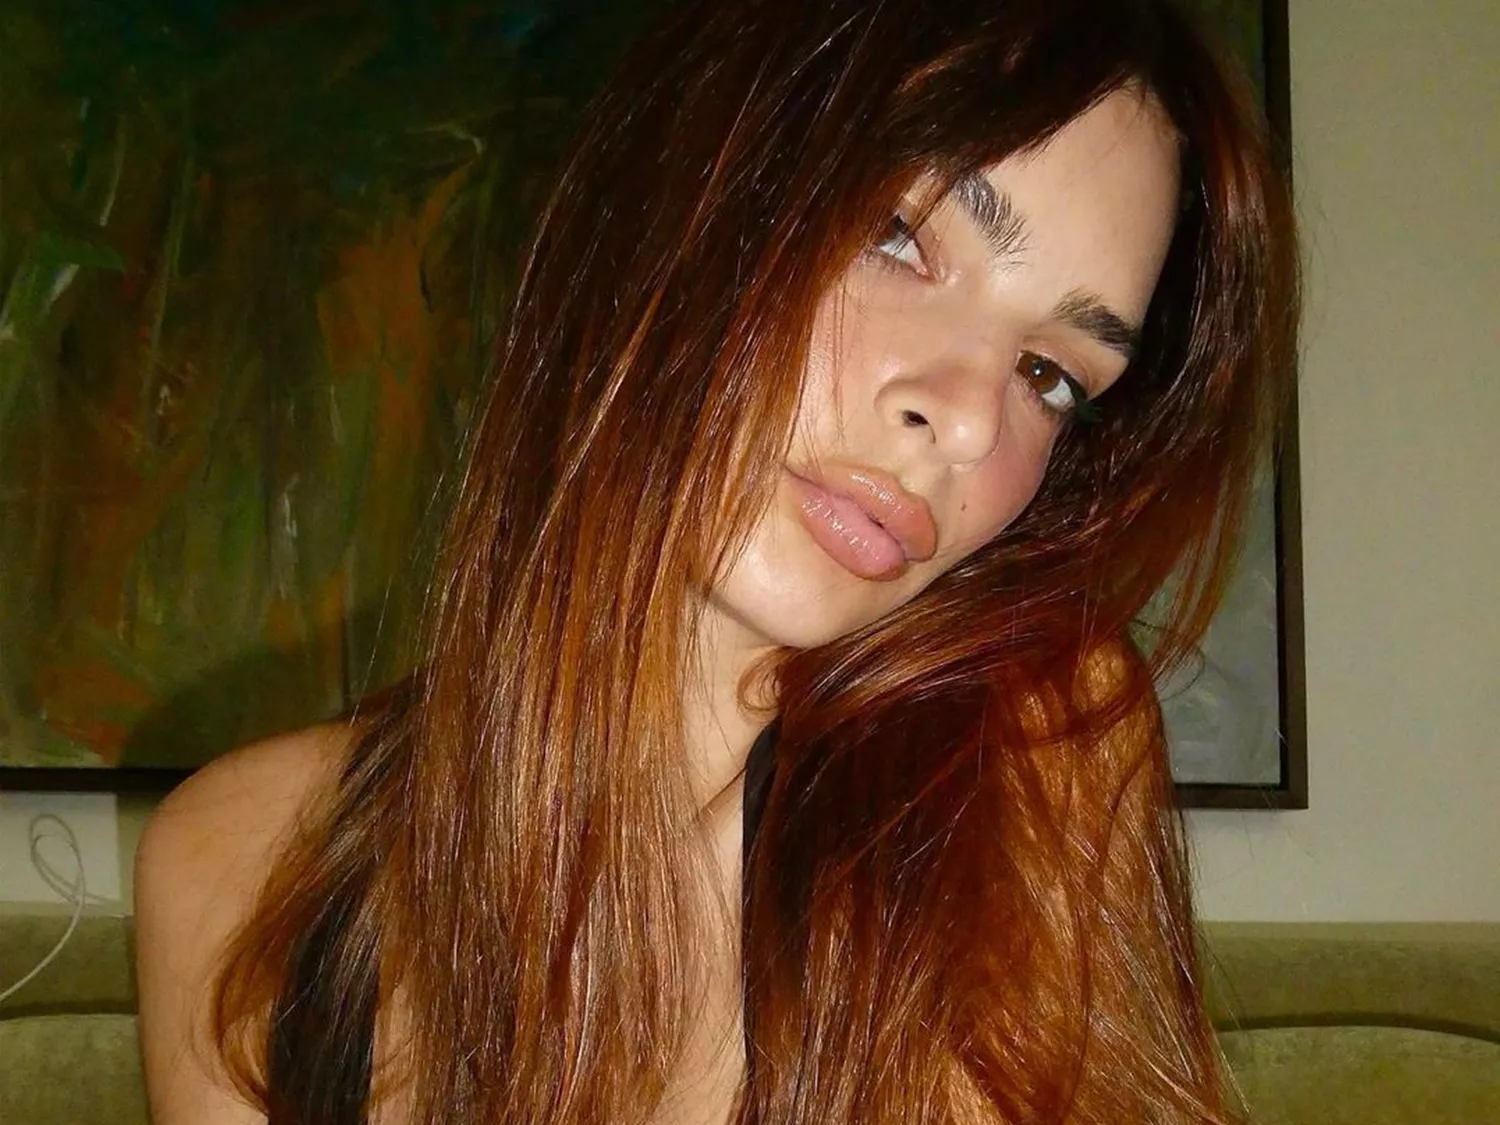 Emily Ratajkowski Debuts a New “Glazed Amber” Hair Color— and Here’s Exactly How She Did It